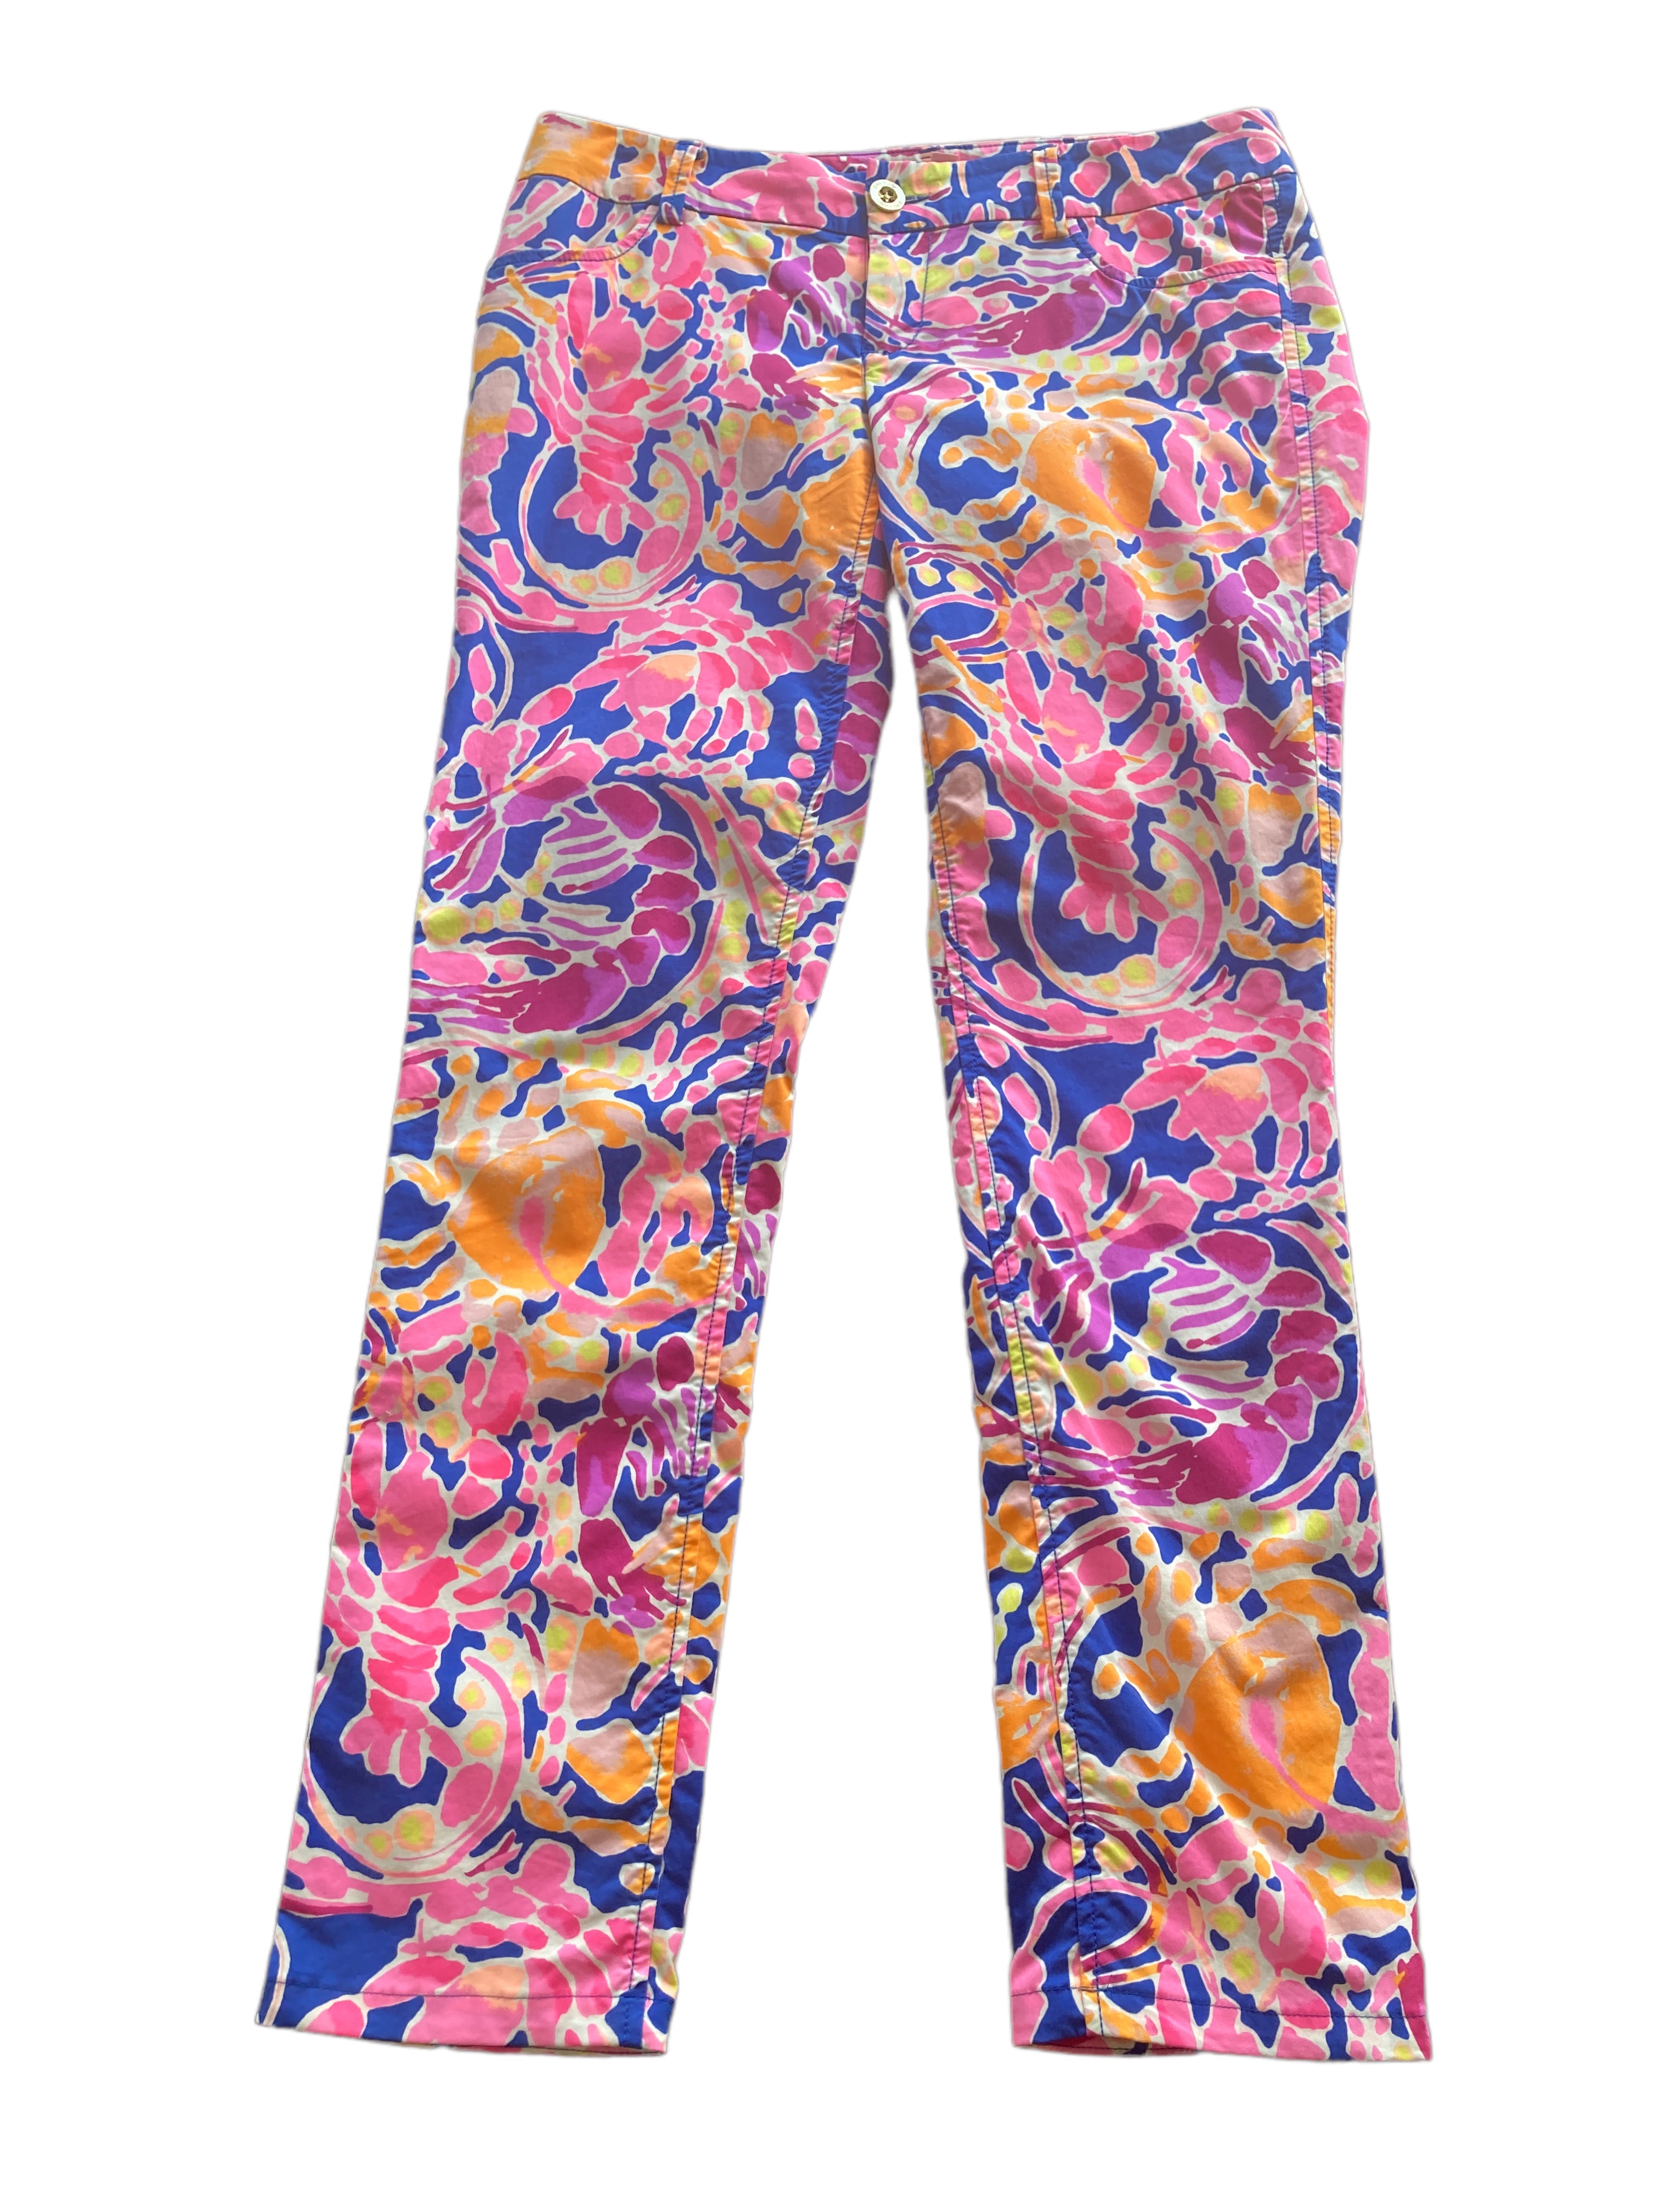 Lilly Pulitzer Seafood Print Pants, 4